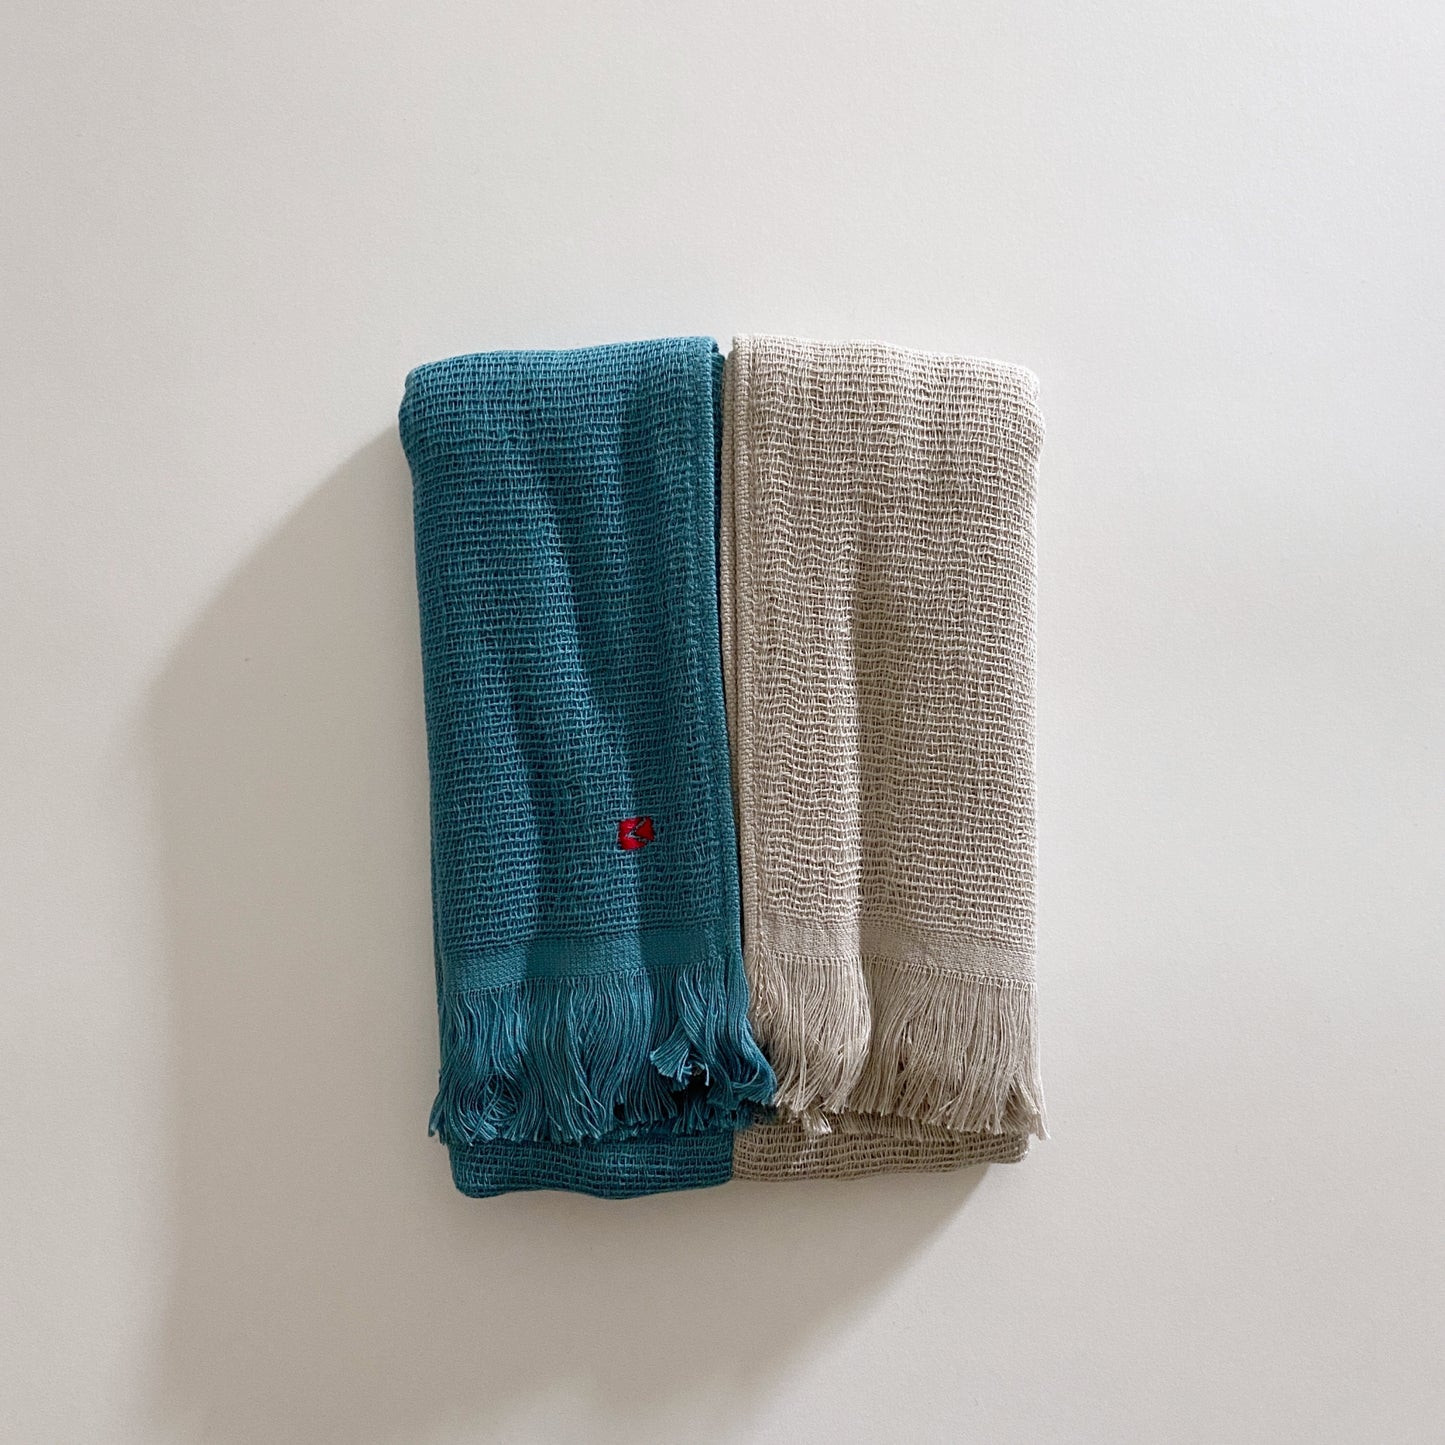 hac : cotton scarf in turquoise & grey